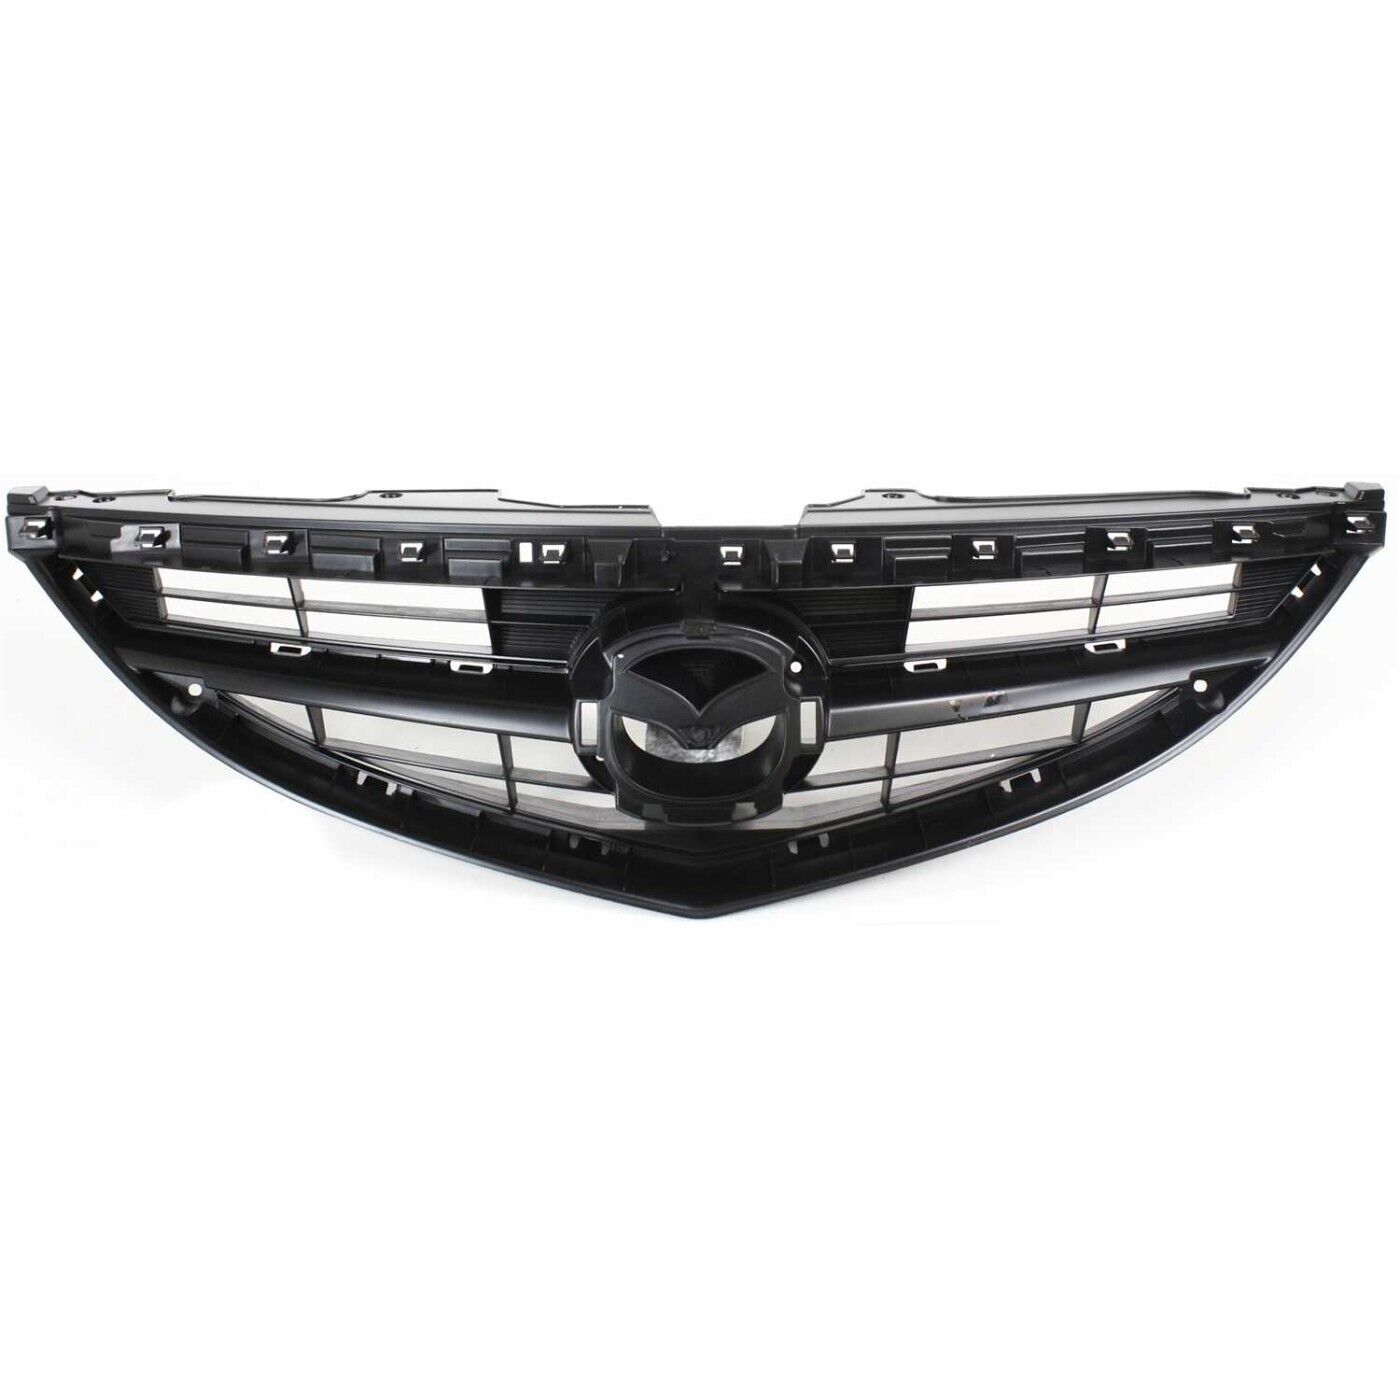 Grille For 2009-2013 Mazda 6 Textured Black Shell and Insert